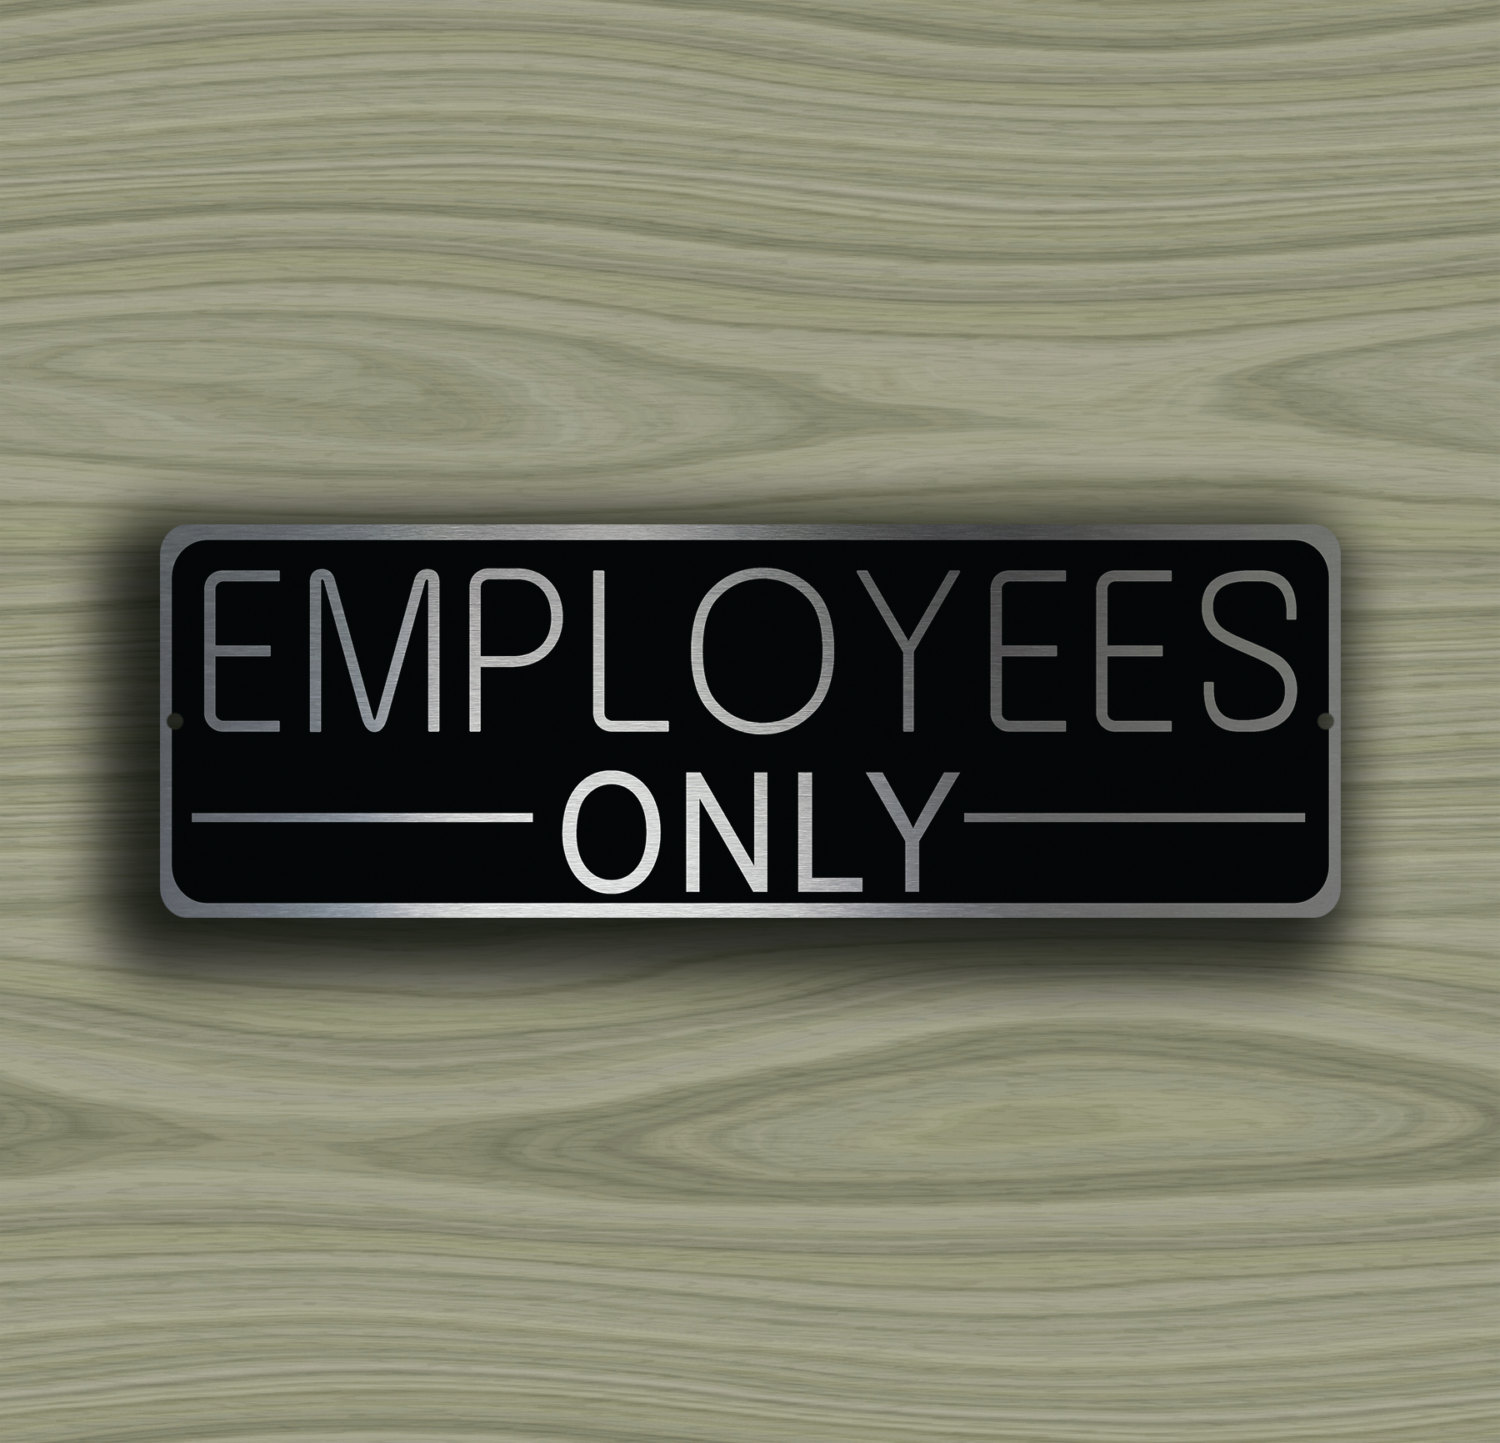 EMPLOYEES-ONLY-SIGN-1